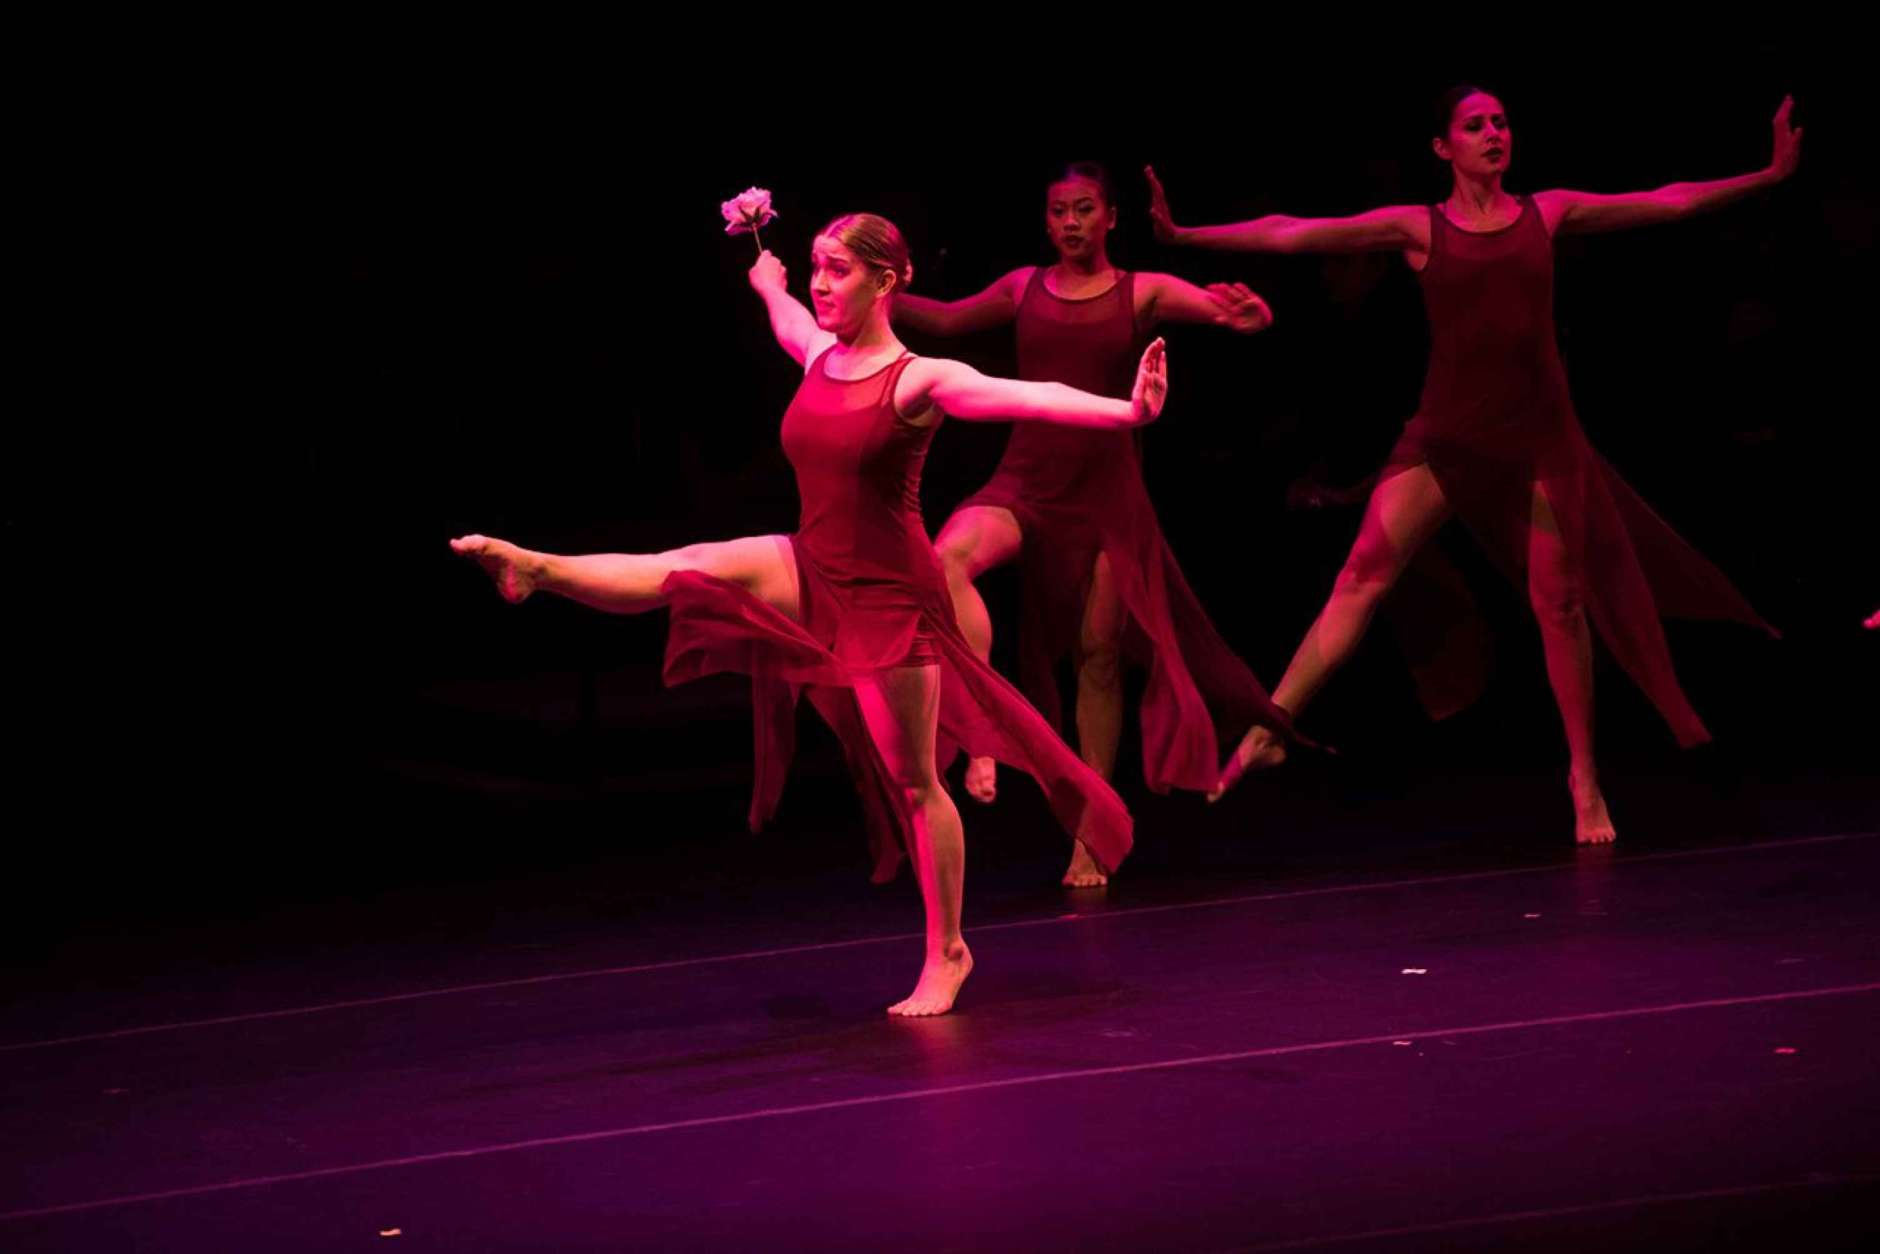 The Contemporary Dance Ensemble performs for "Performance in Remembrance" at the Moss Arts Center on April 14, 2017. (Courtesy Virginia Tech)